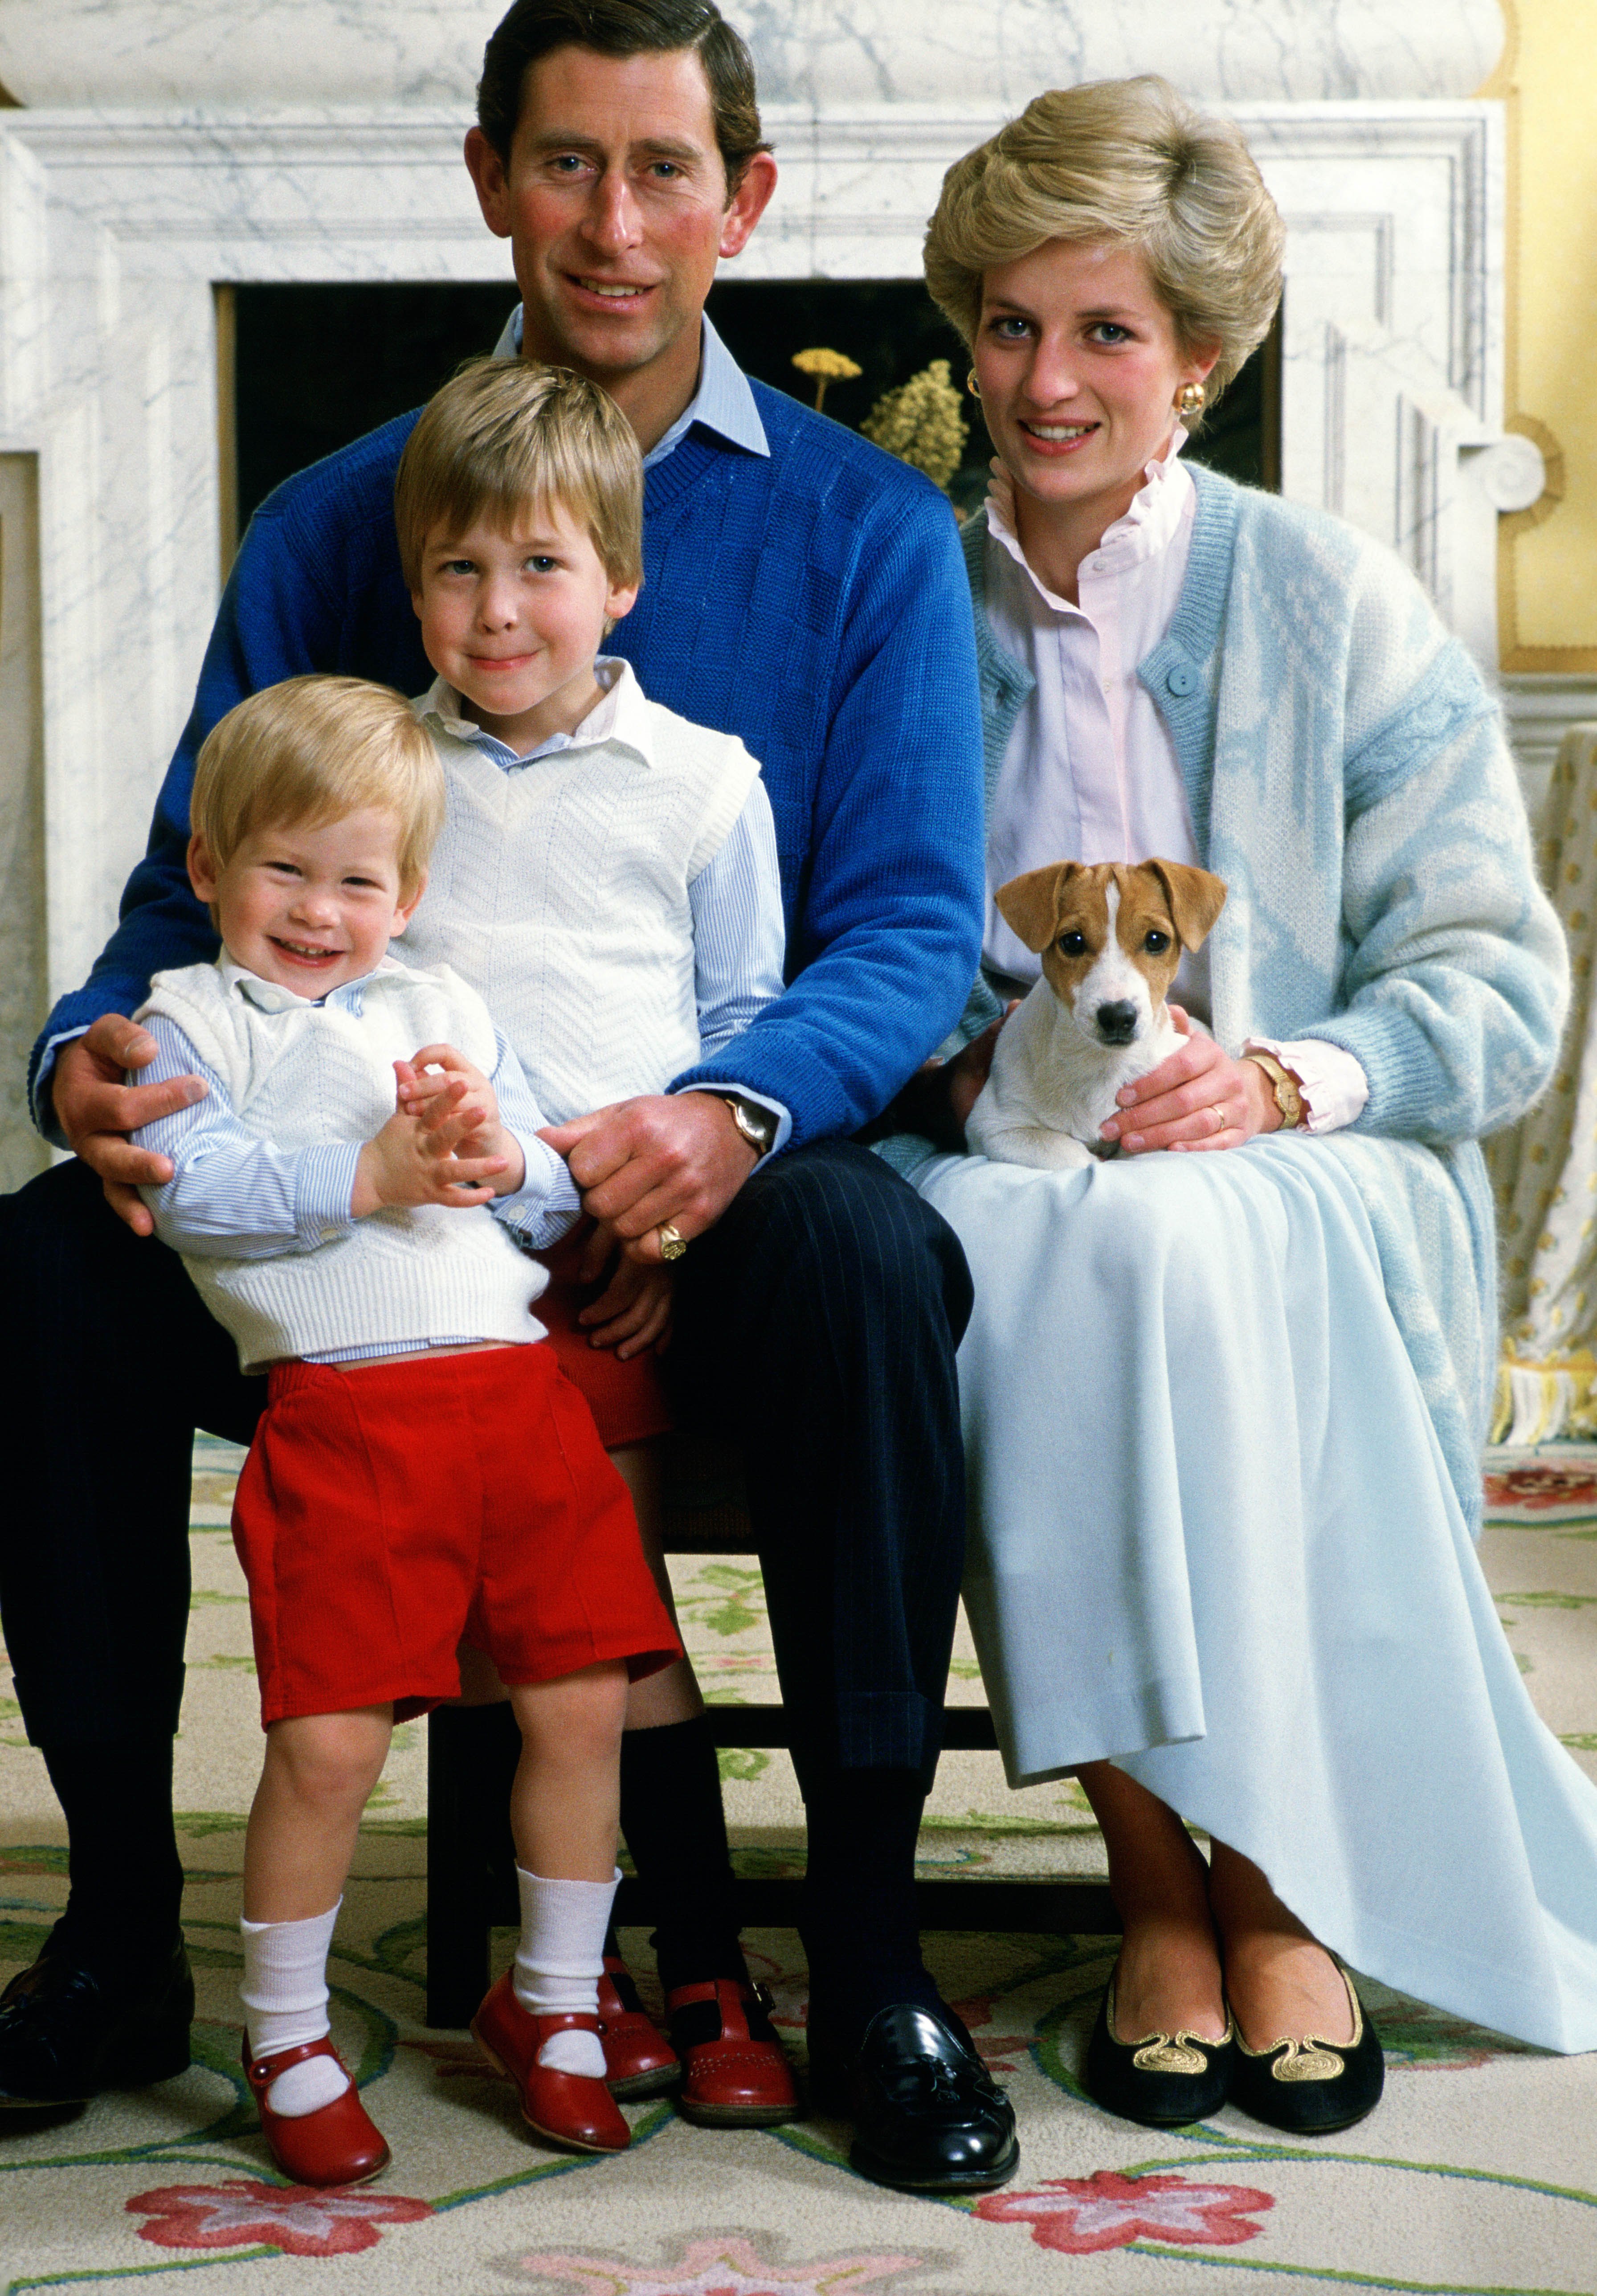 Prince Charles, Prince of Wales and Diana, Princess of Wales at the Kensington Palace with their sons Prince William and Prince Harry on December 1, 1986 | Source: Getty Images